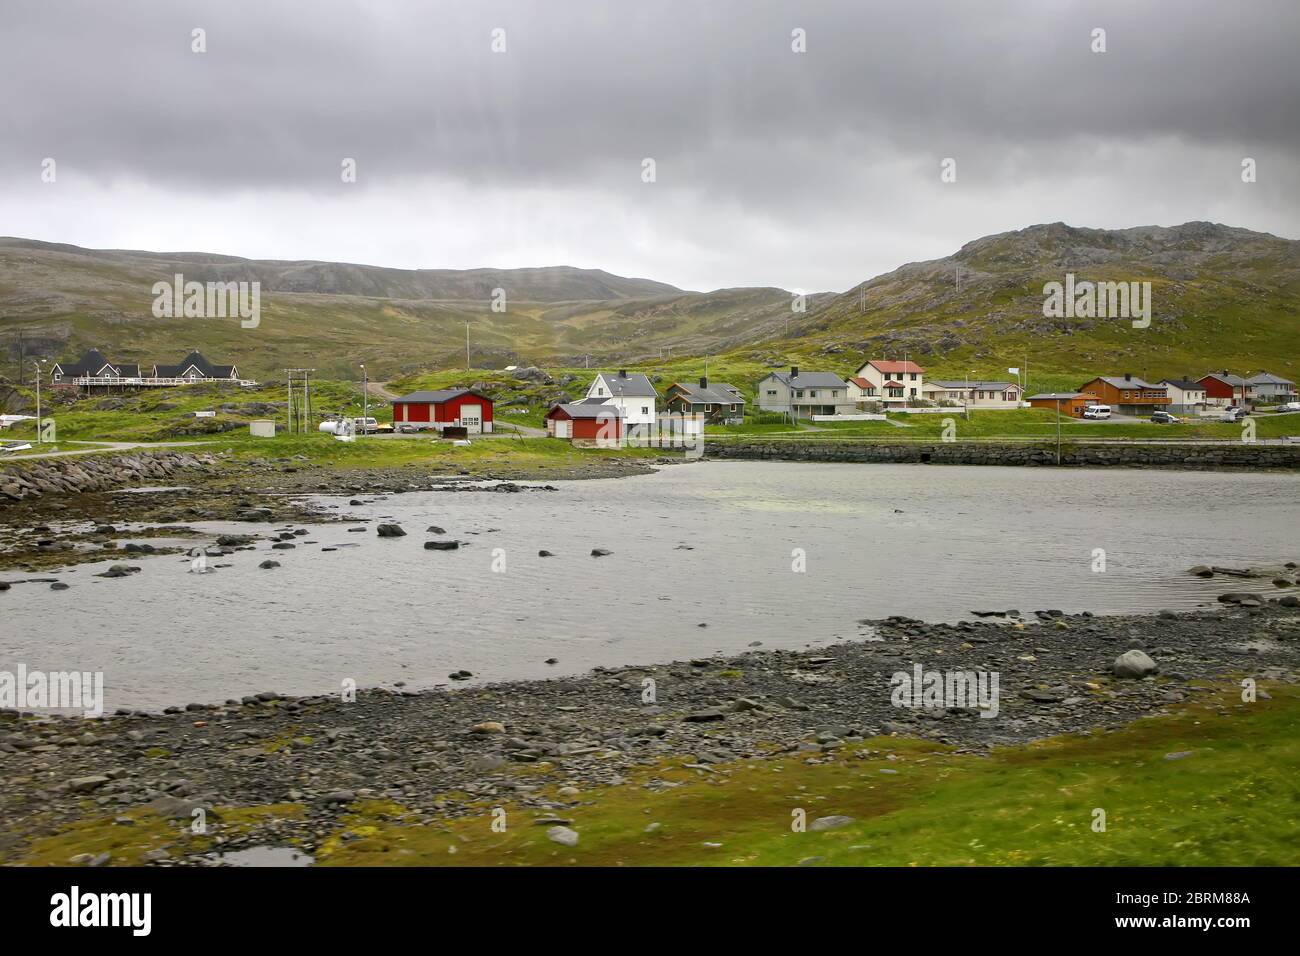 Skarsvag is a village in Nordkapp Municipality in Troms og Finnmark county, Norway. The village is on the northern coast of the island of Mageroya. Stock Photo